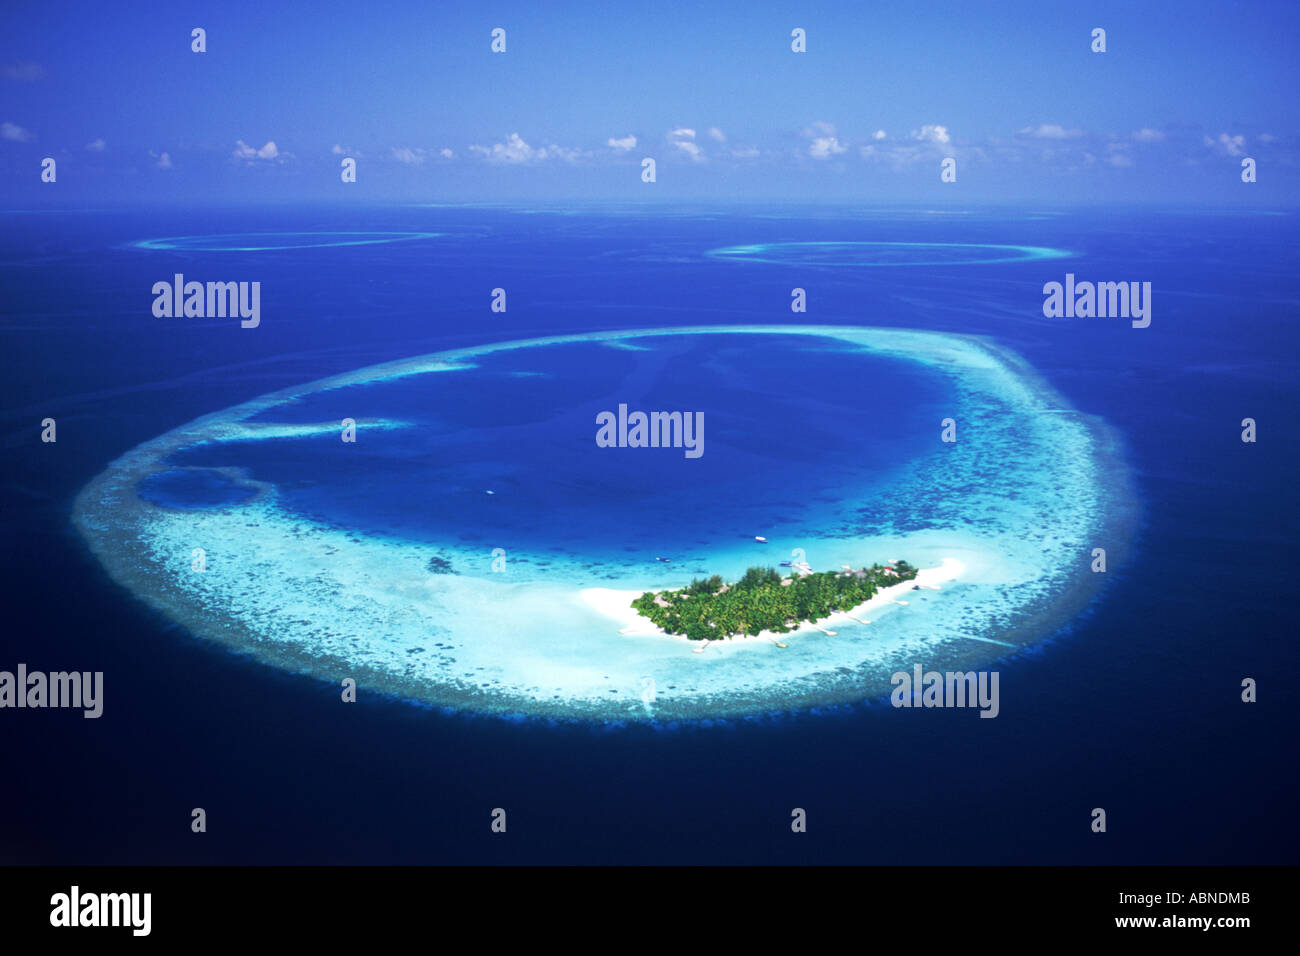 Tropical island in North East Ari Atoll with encircling reef in the Maldives surrounded by aqua blue waters of the Indian Ocean Stock Photo